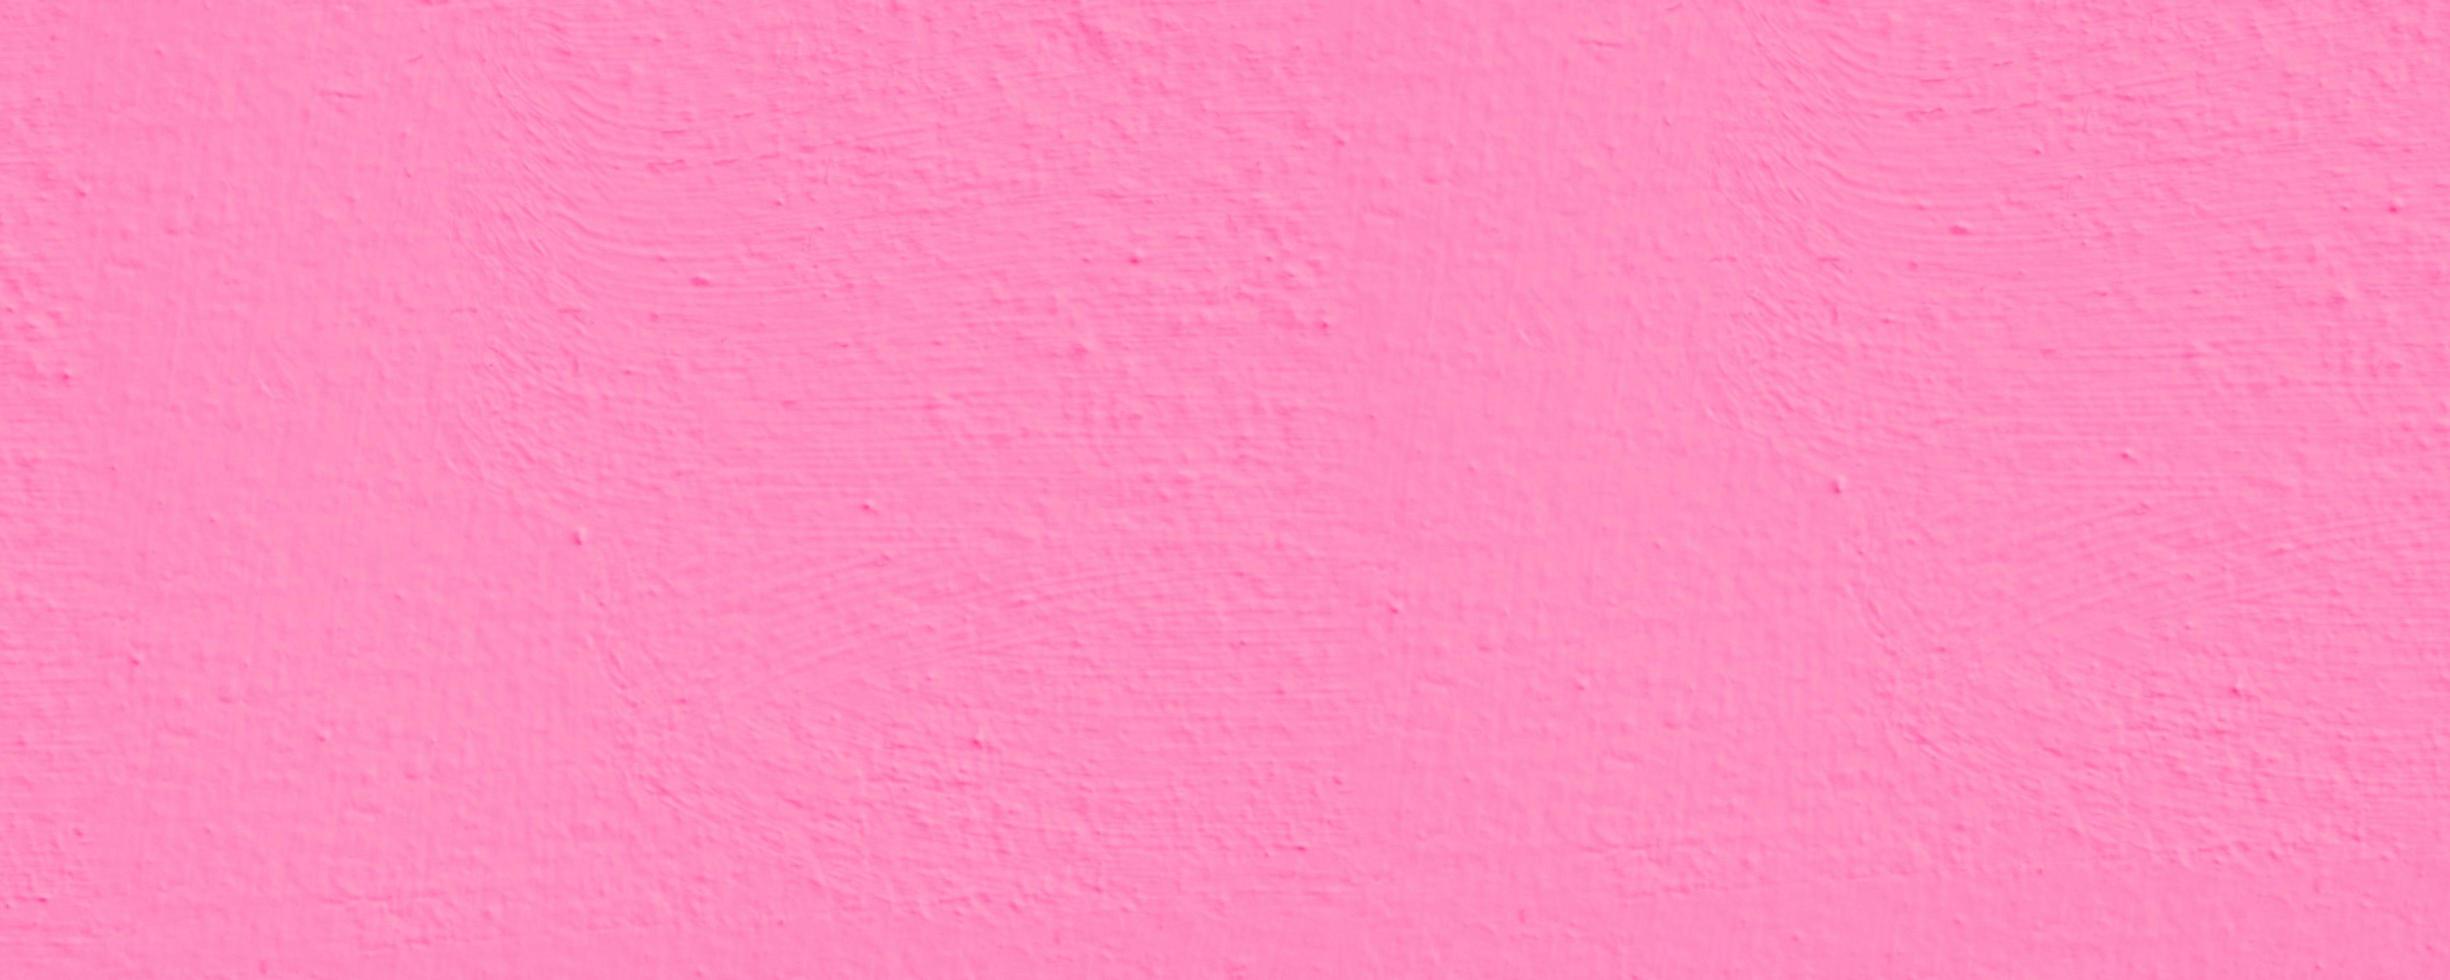 Pink Emulsion wall paint texture rectangle background photo